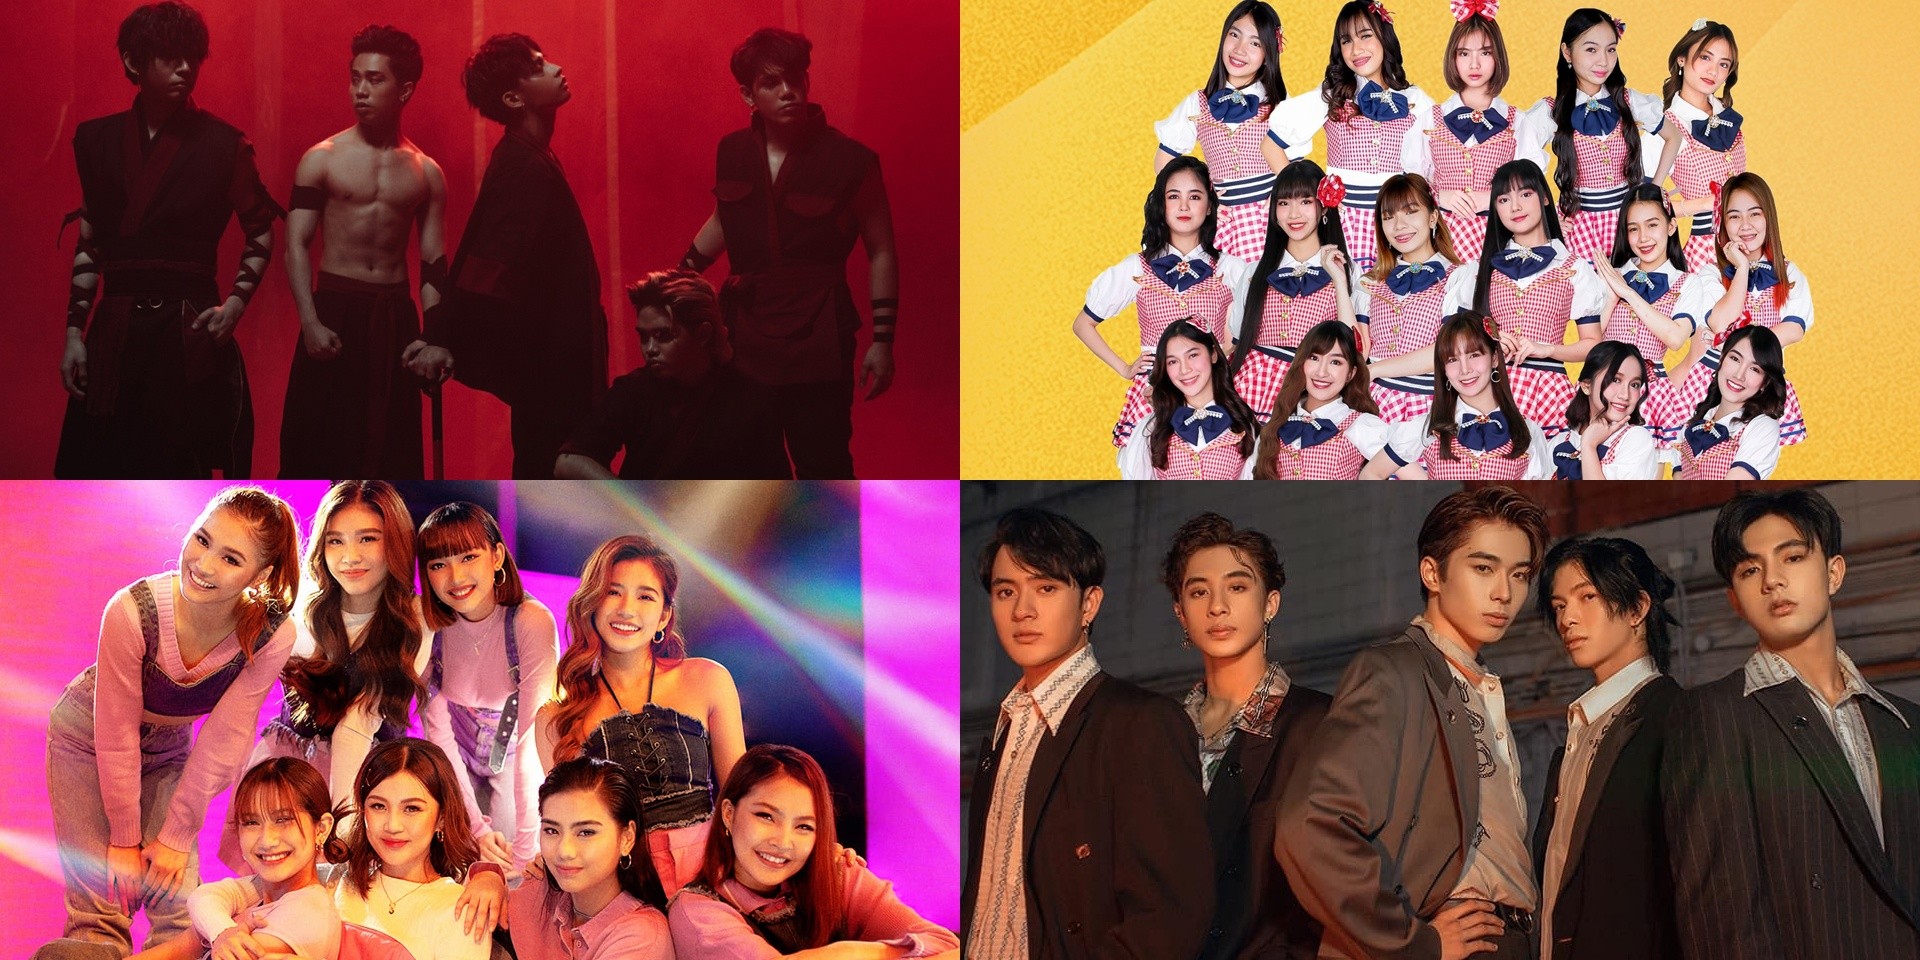 SB19, BINI, BGYO, MNL48, and more to perform at PPOP CON this April